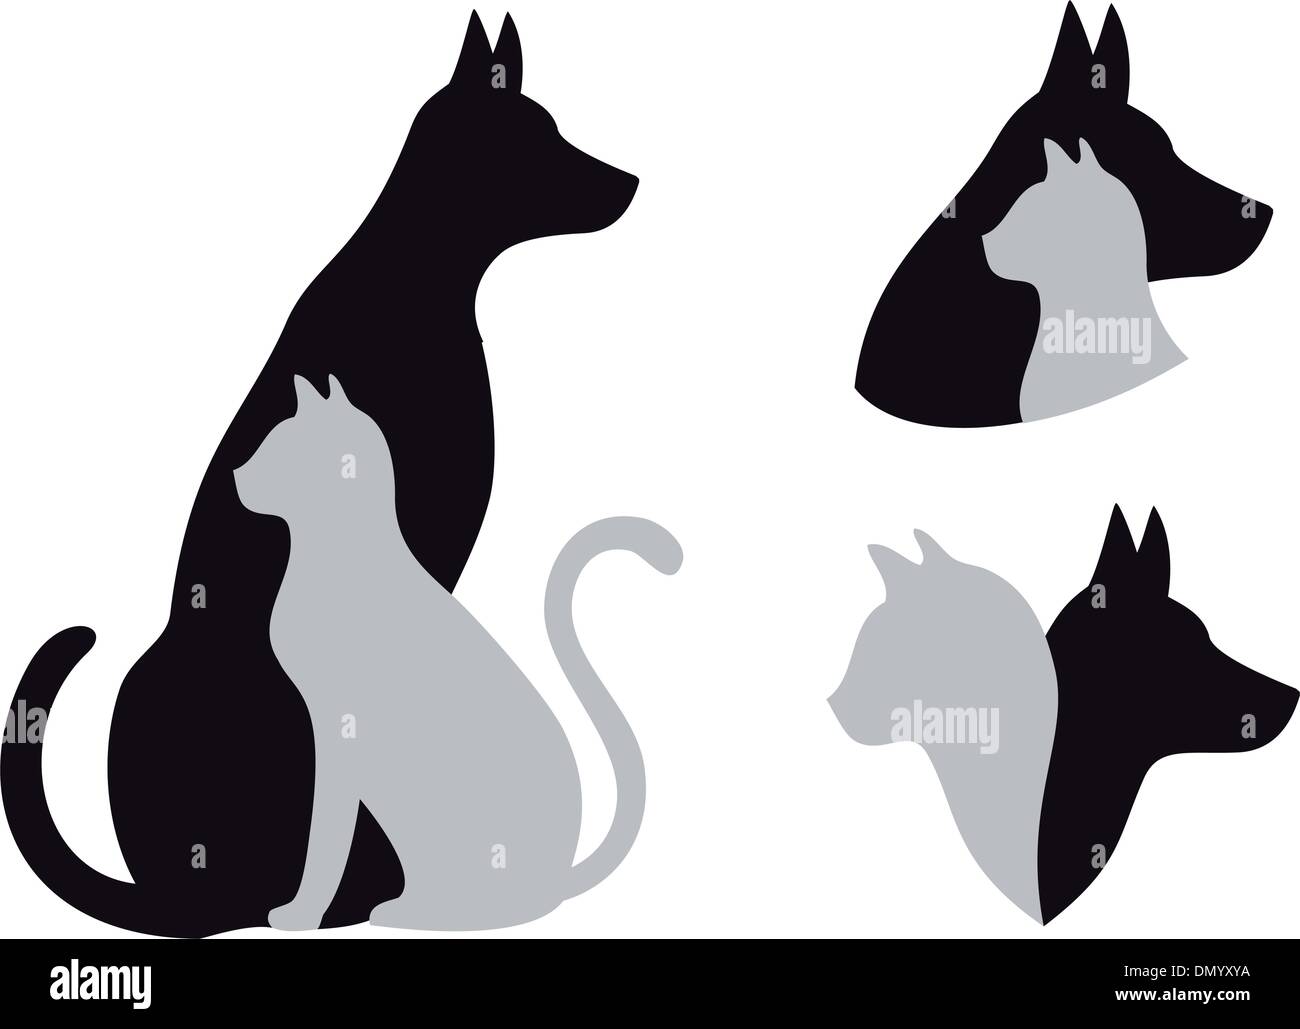 cat and dog, vector Stock Vector